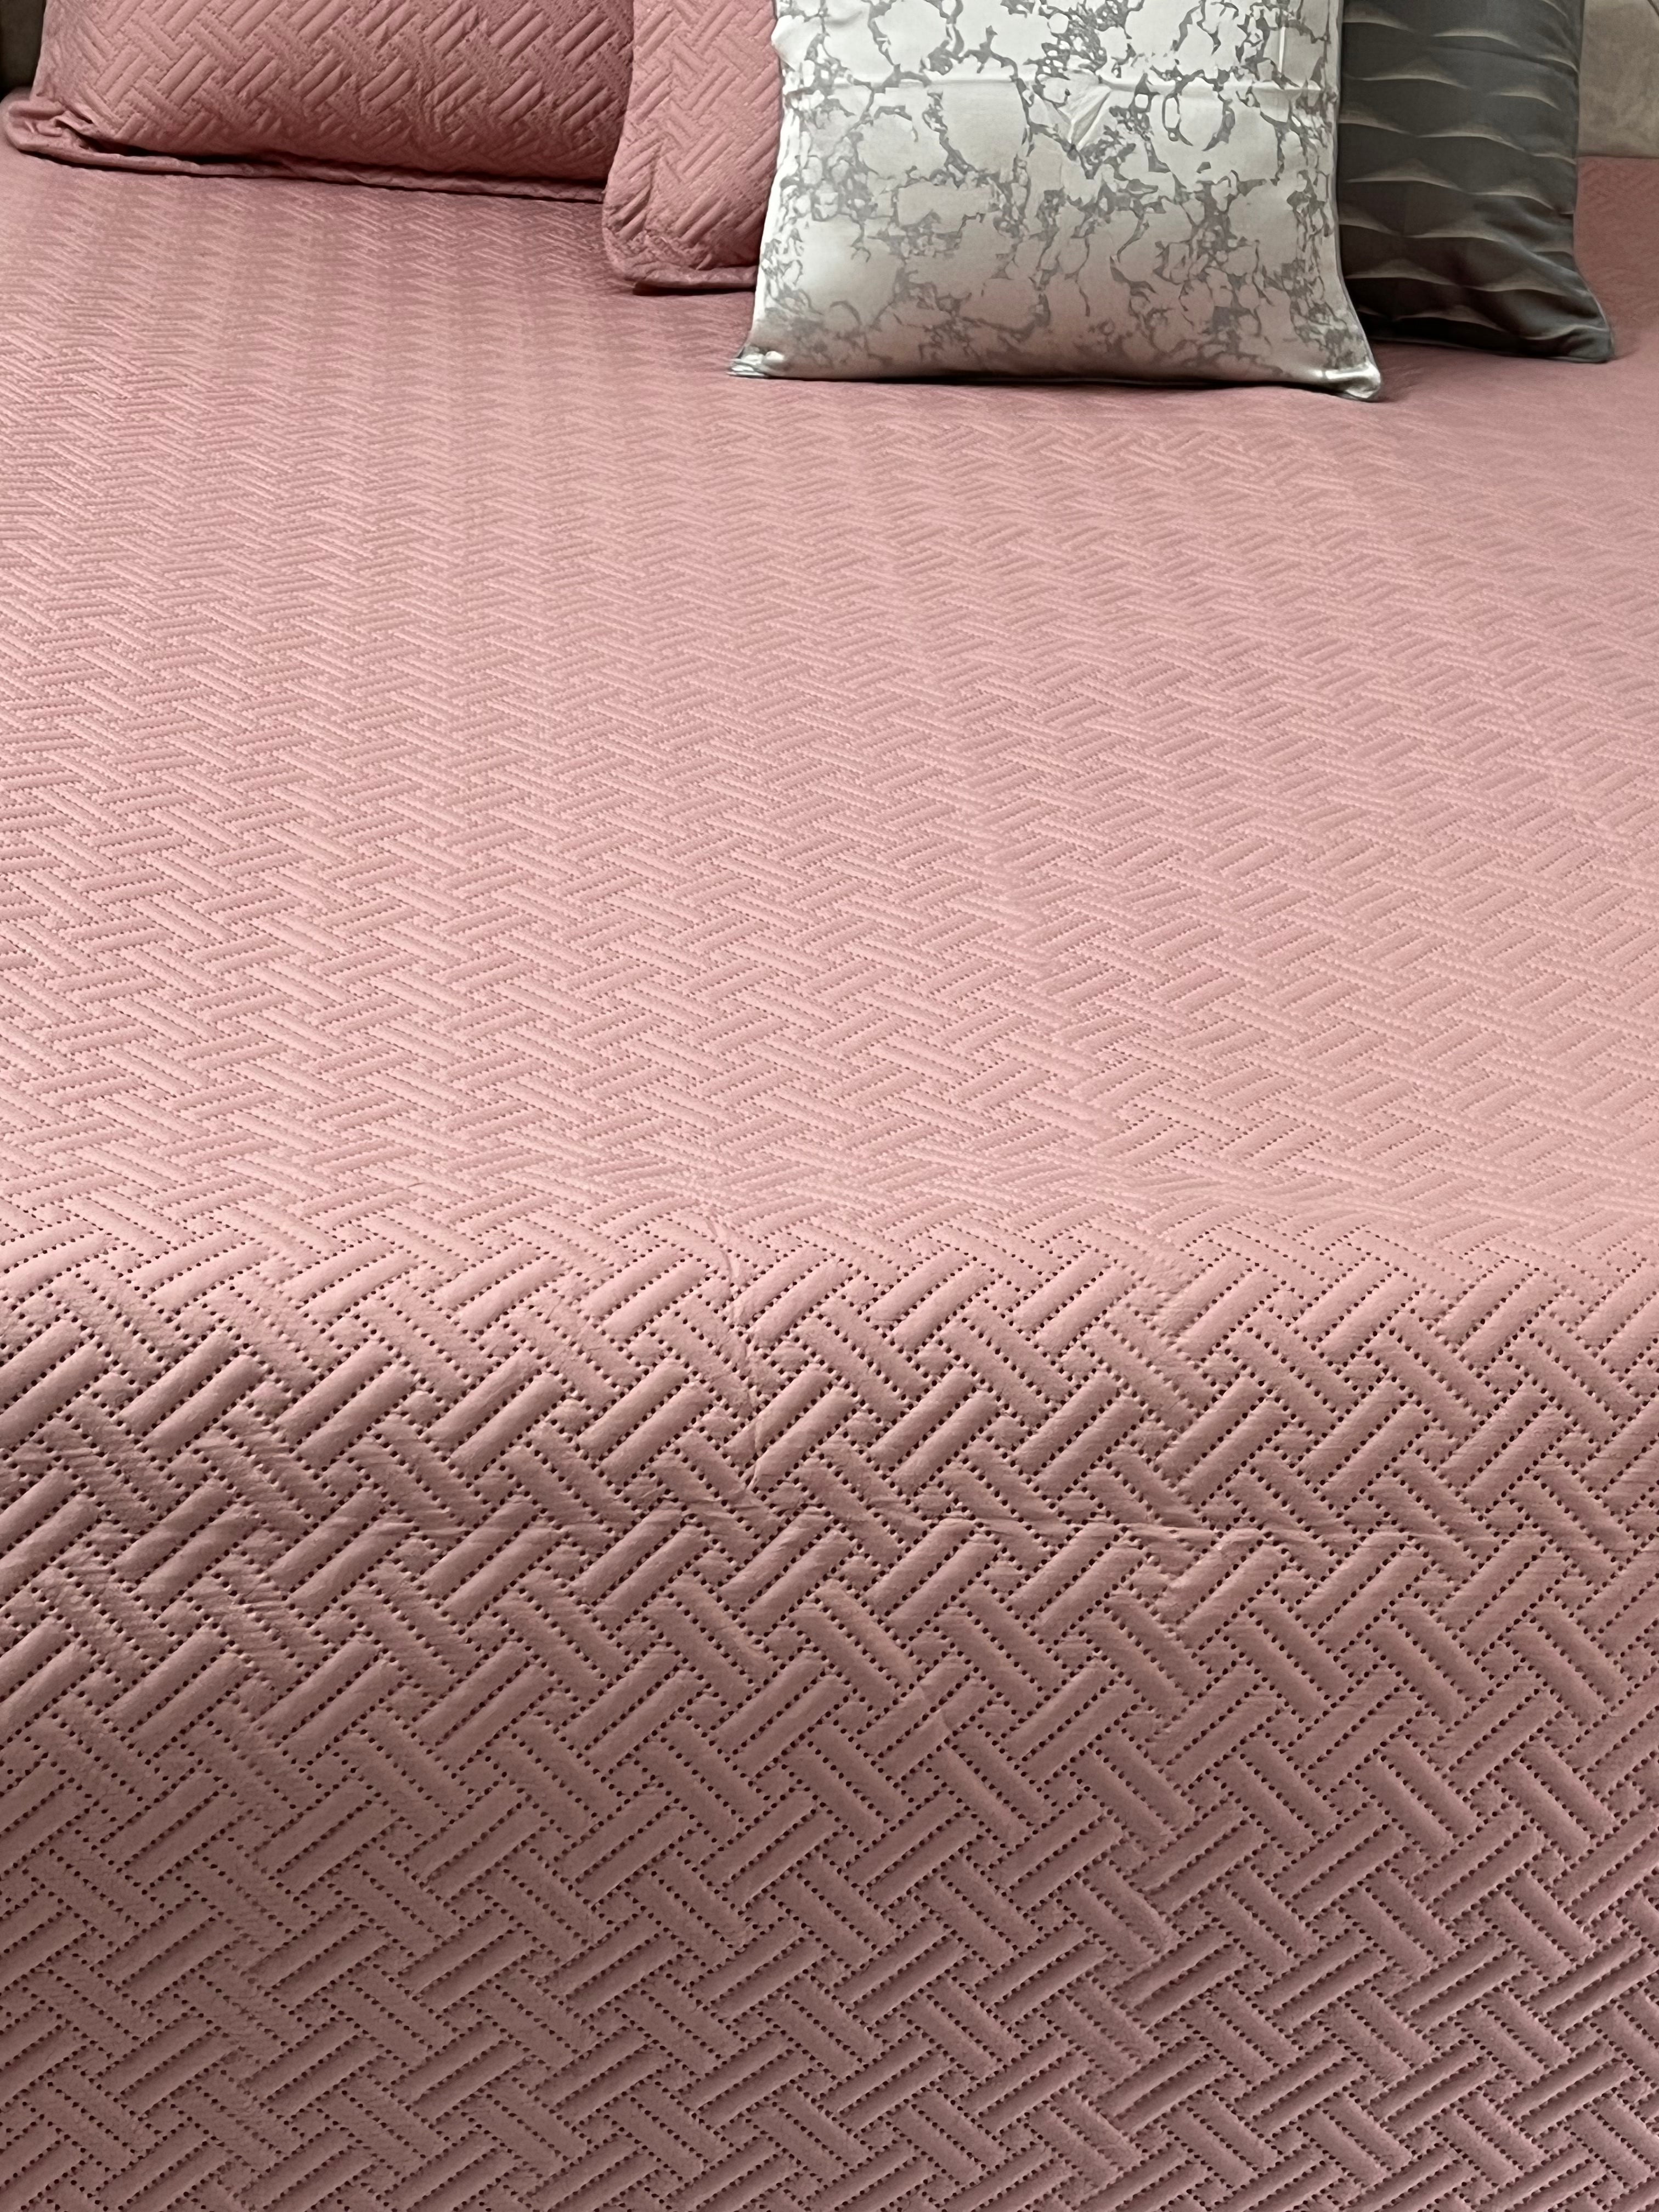 Powder Pink Ultrasonic King Size Bedspread 90x100 inches